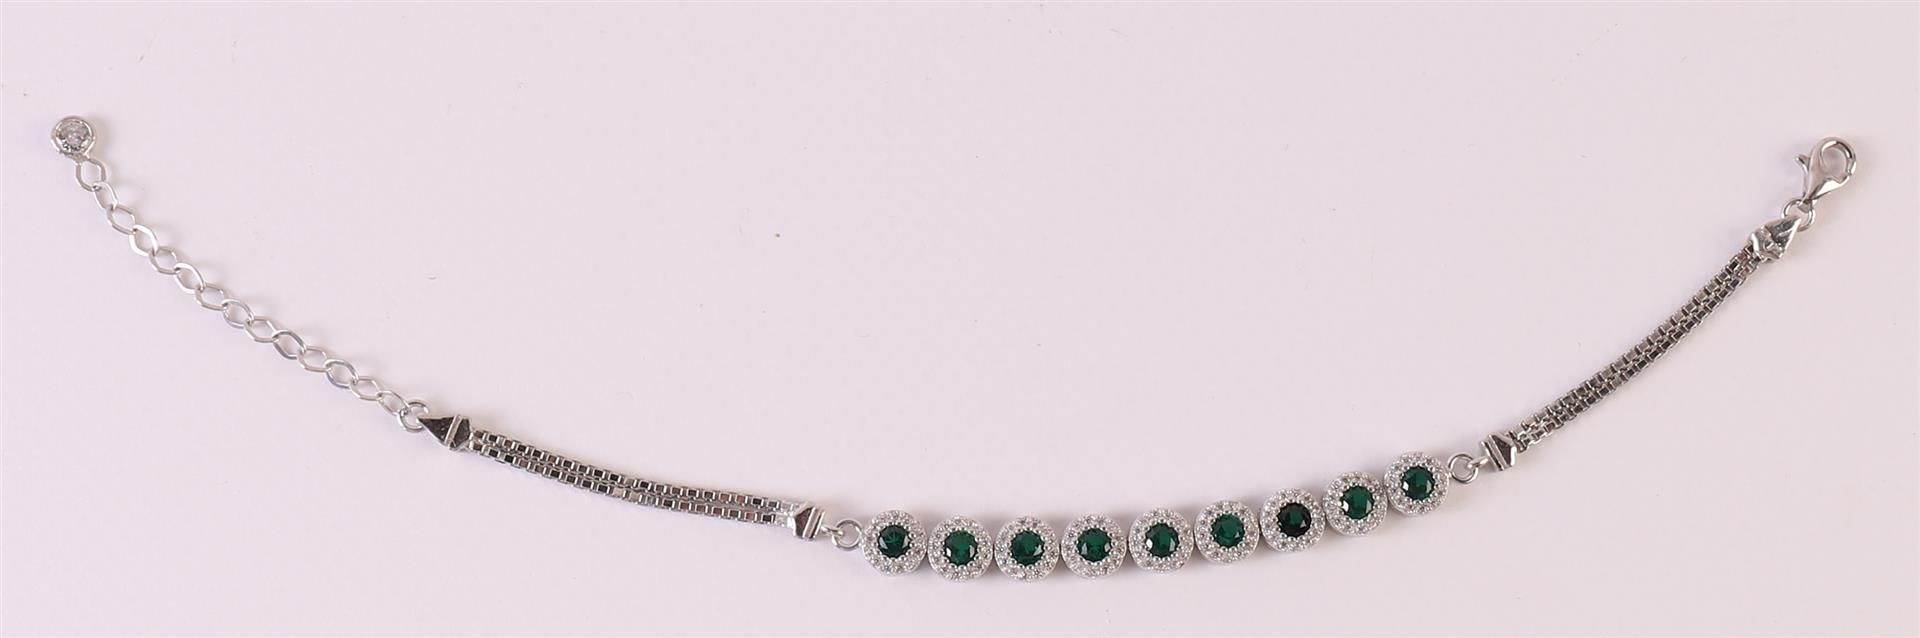 A 1st grade 925/1000 silver bracelet with facet cut green stones and zirconias. - Image 3 of 3